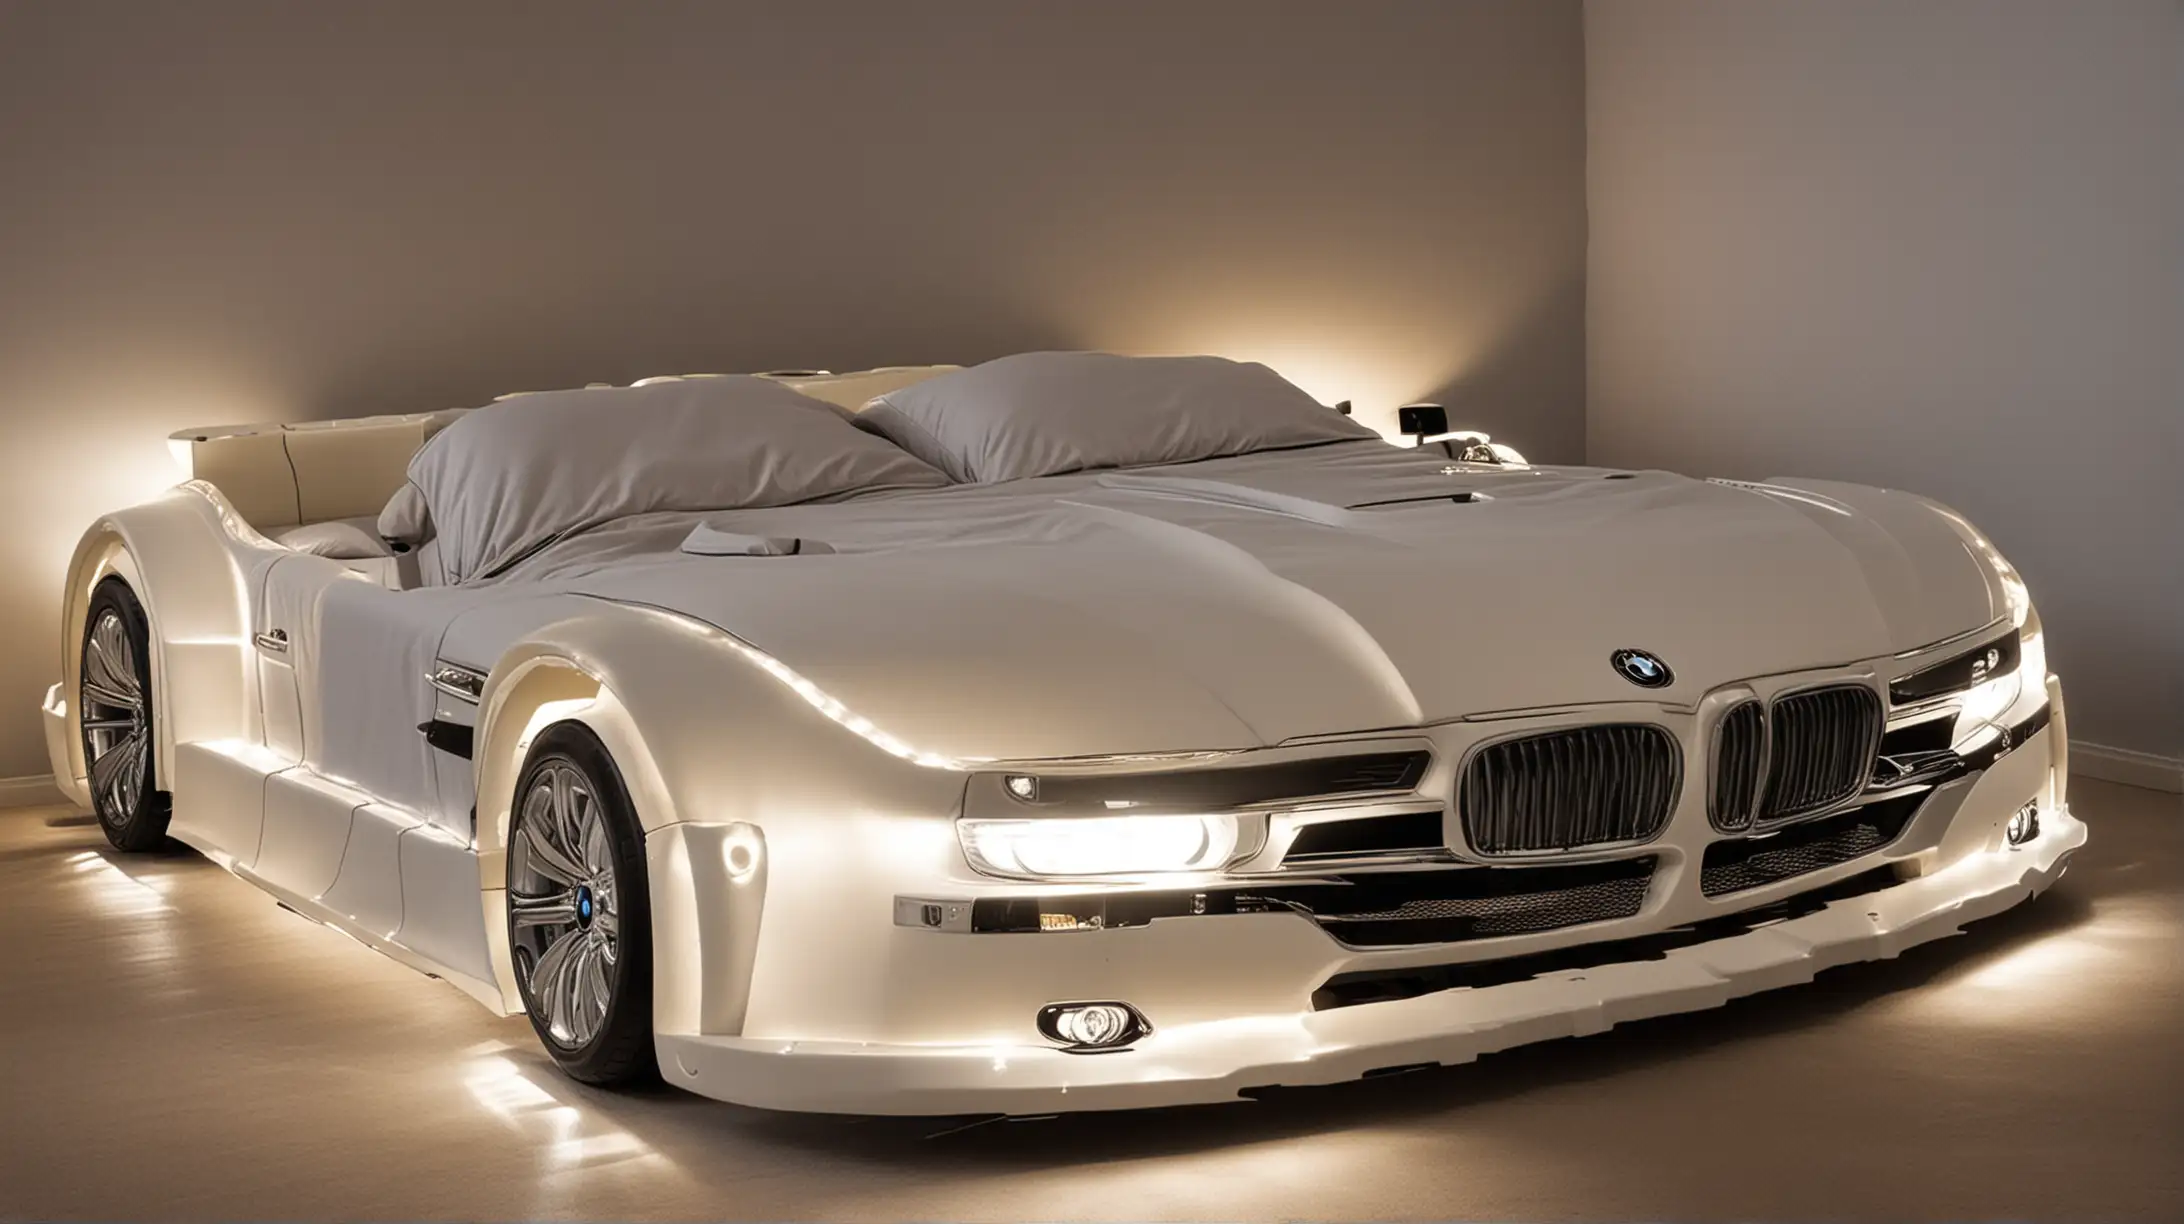 Double bed in the shape of a BMW car with headlights on